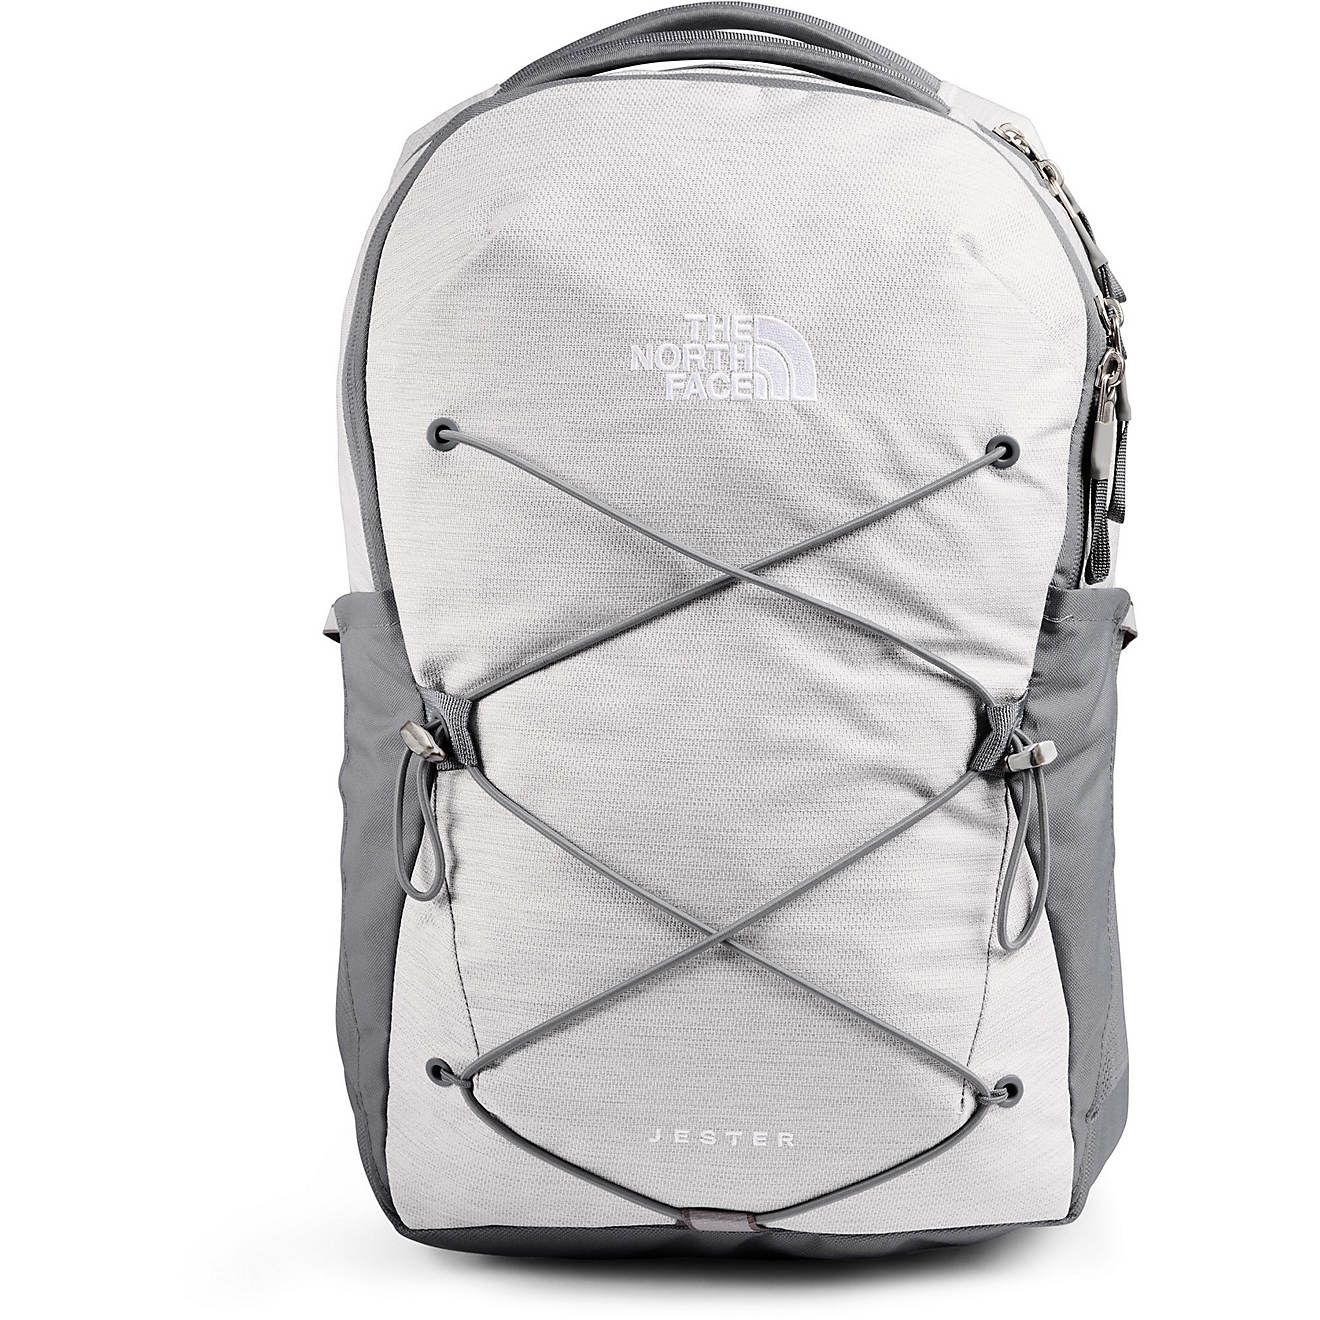 The North Face Women's Jester Backpack | Academy | Academy Sports + Outdoors